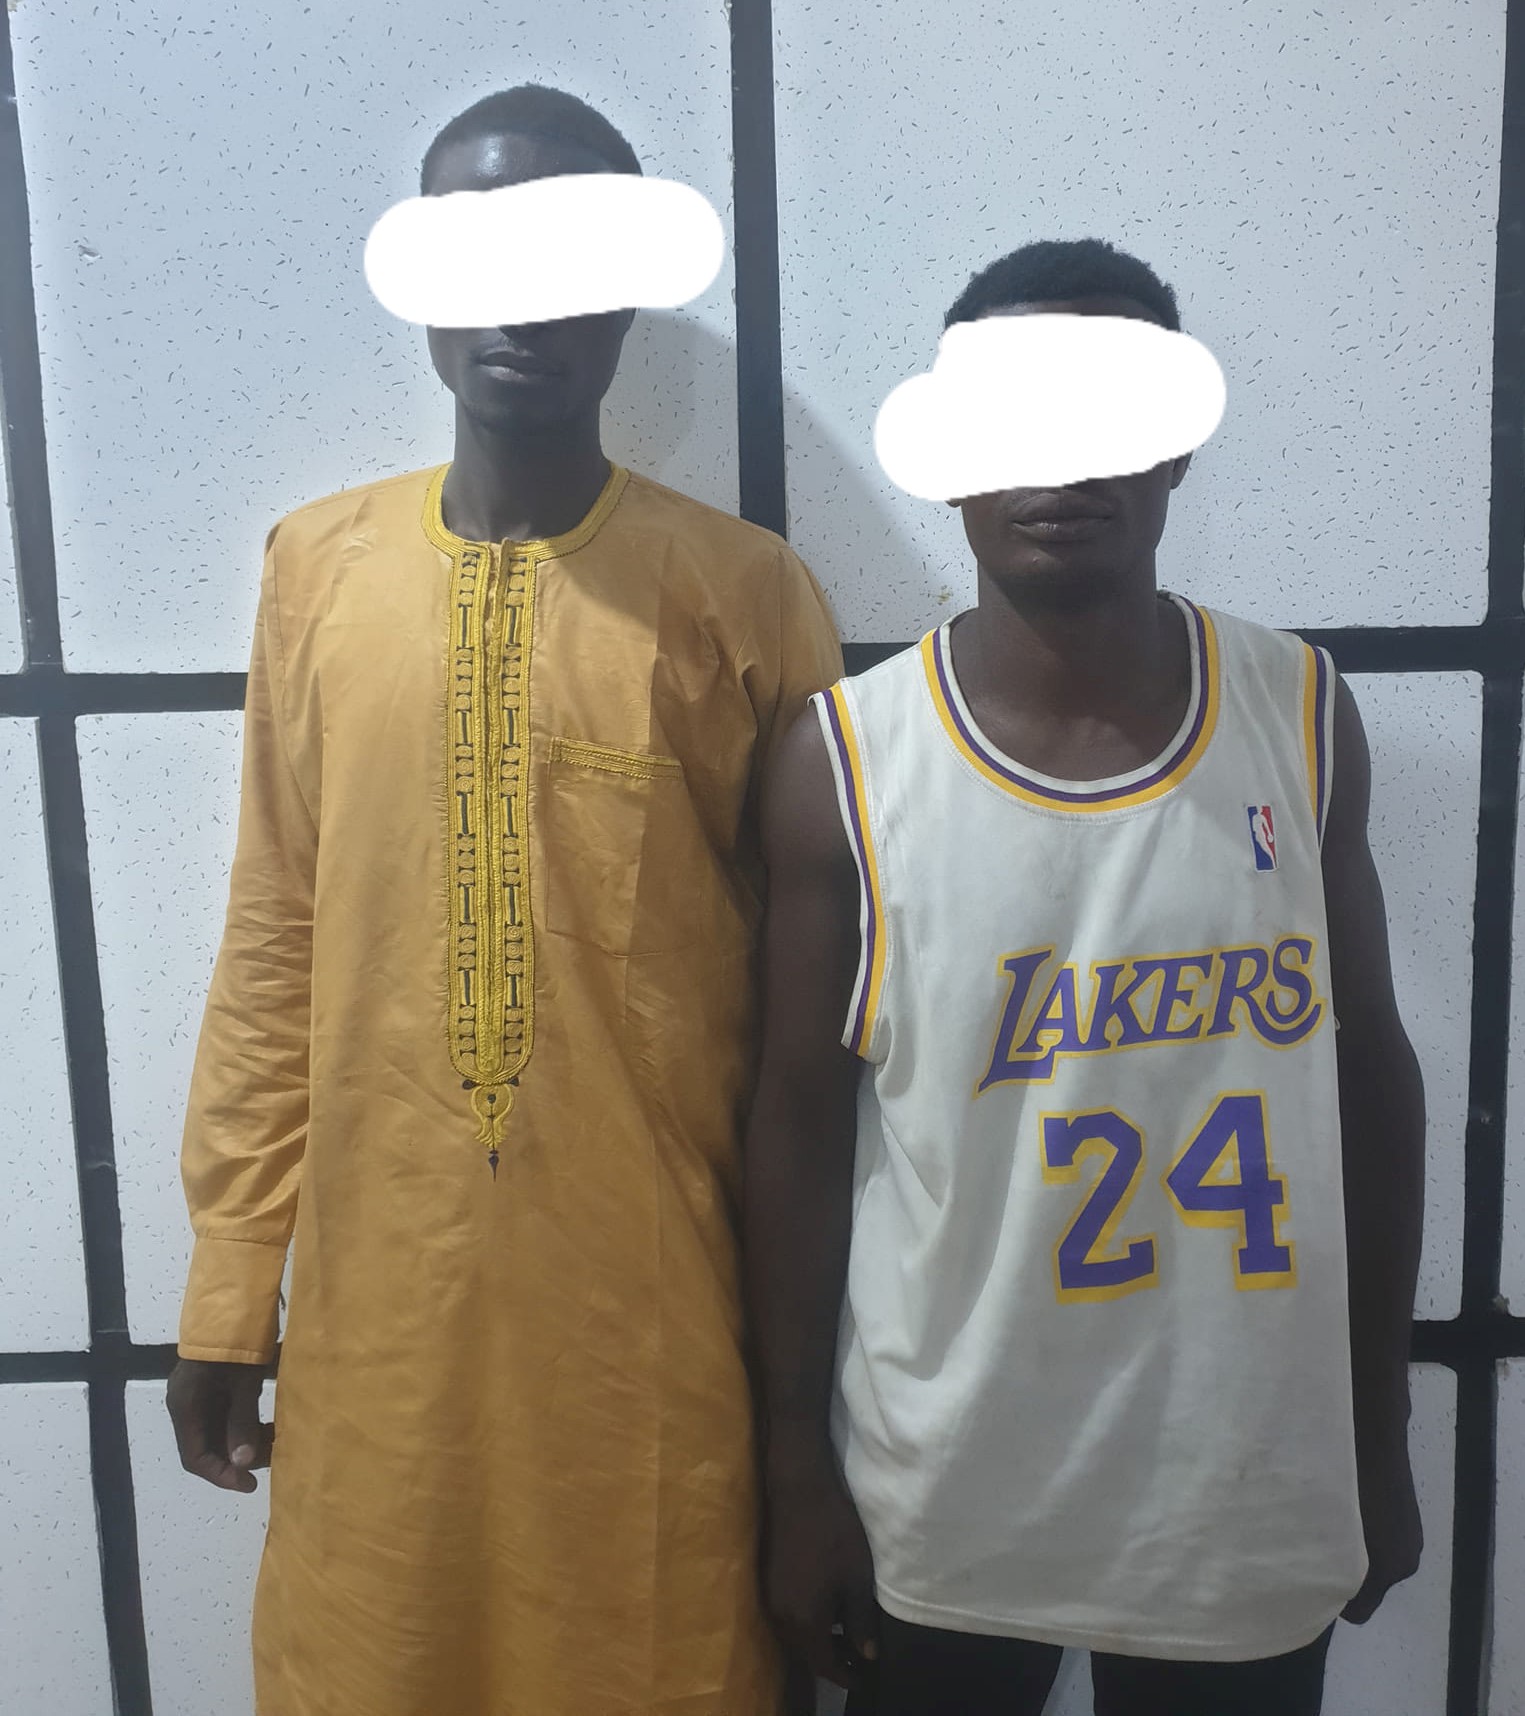 Two suspects arrested over kidnapping threat in Jigawa.